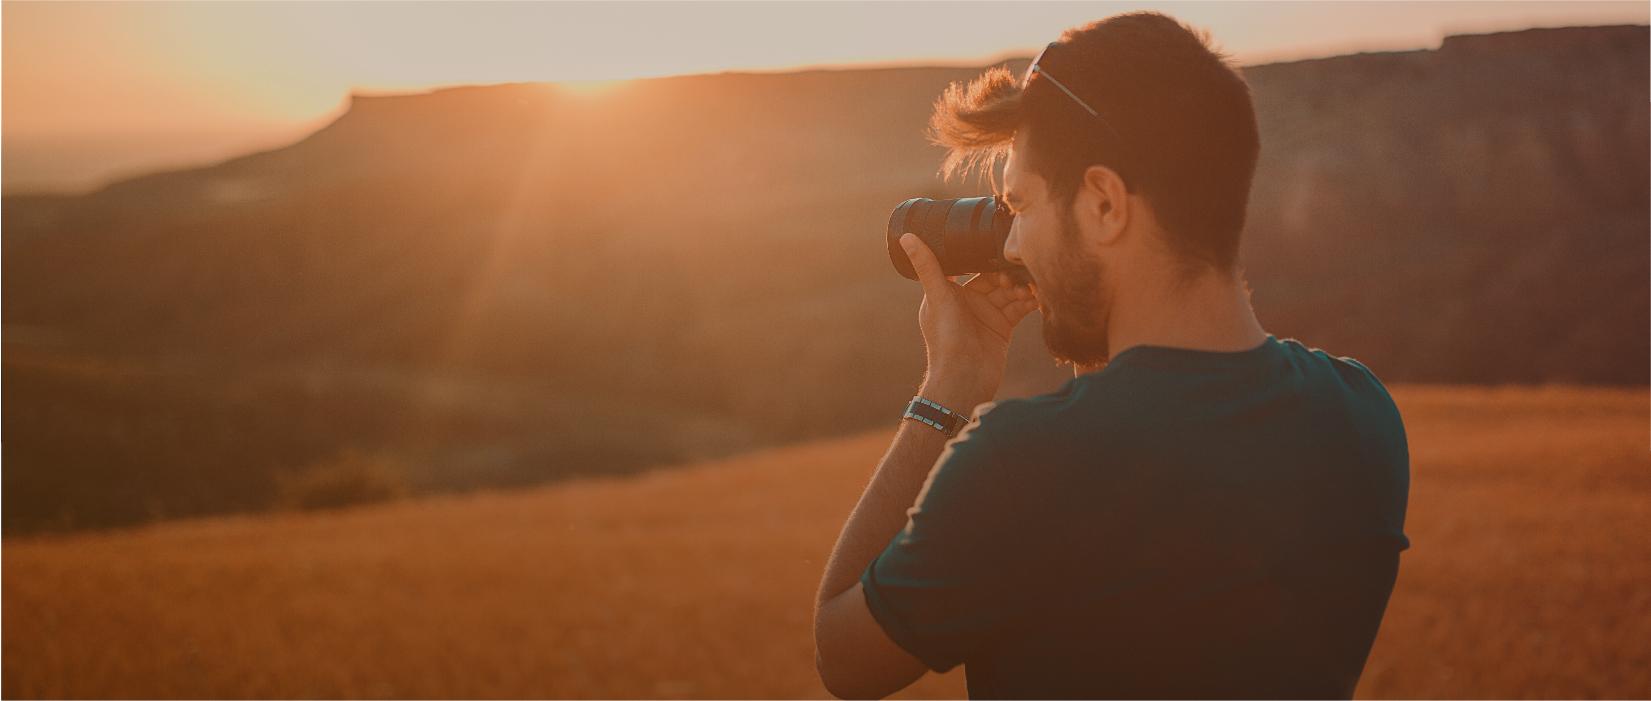 Man taking a photo of a landscape at sunset